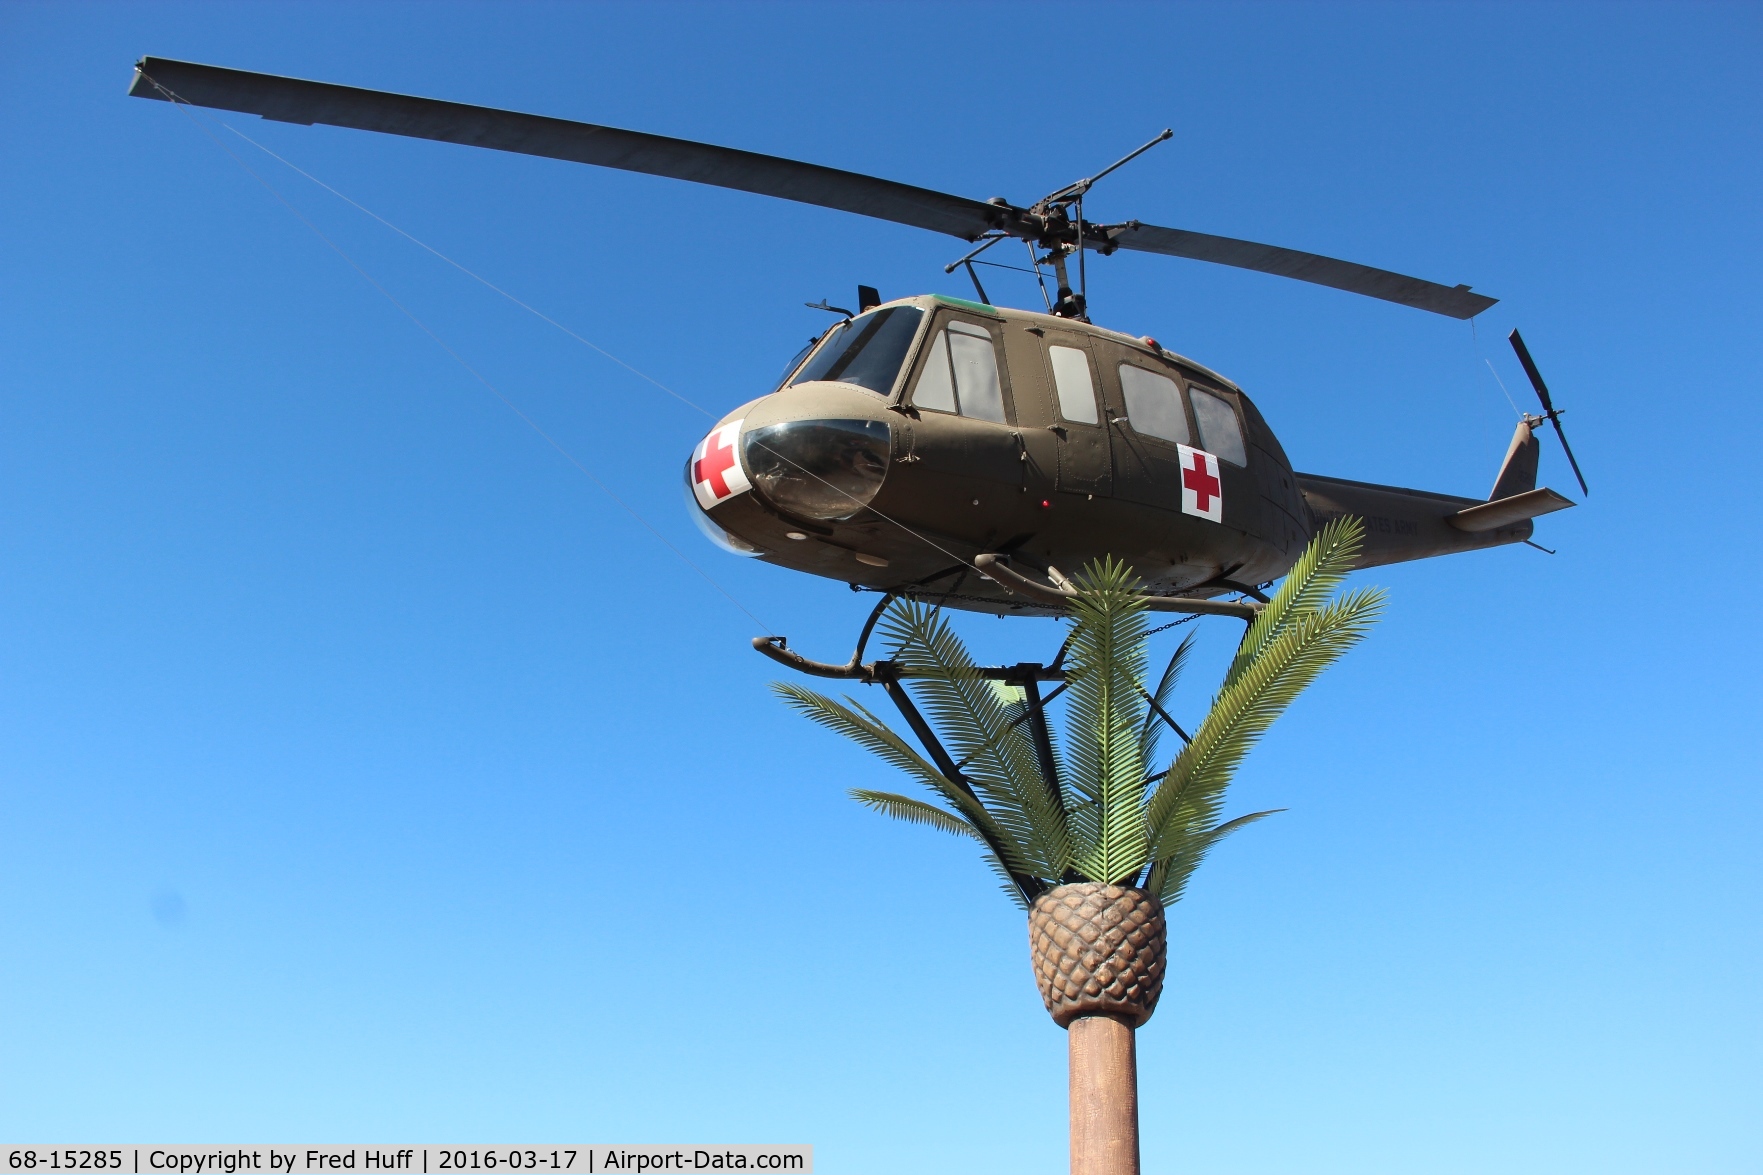 68-15285, 1968 Bell UH-1H Iroquois C/N 10215, At Vietnam War Memorial in Las Cruces, NM
Placed on permanent display March 1, 2016